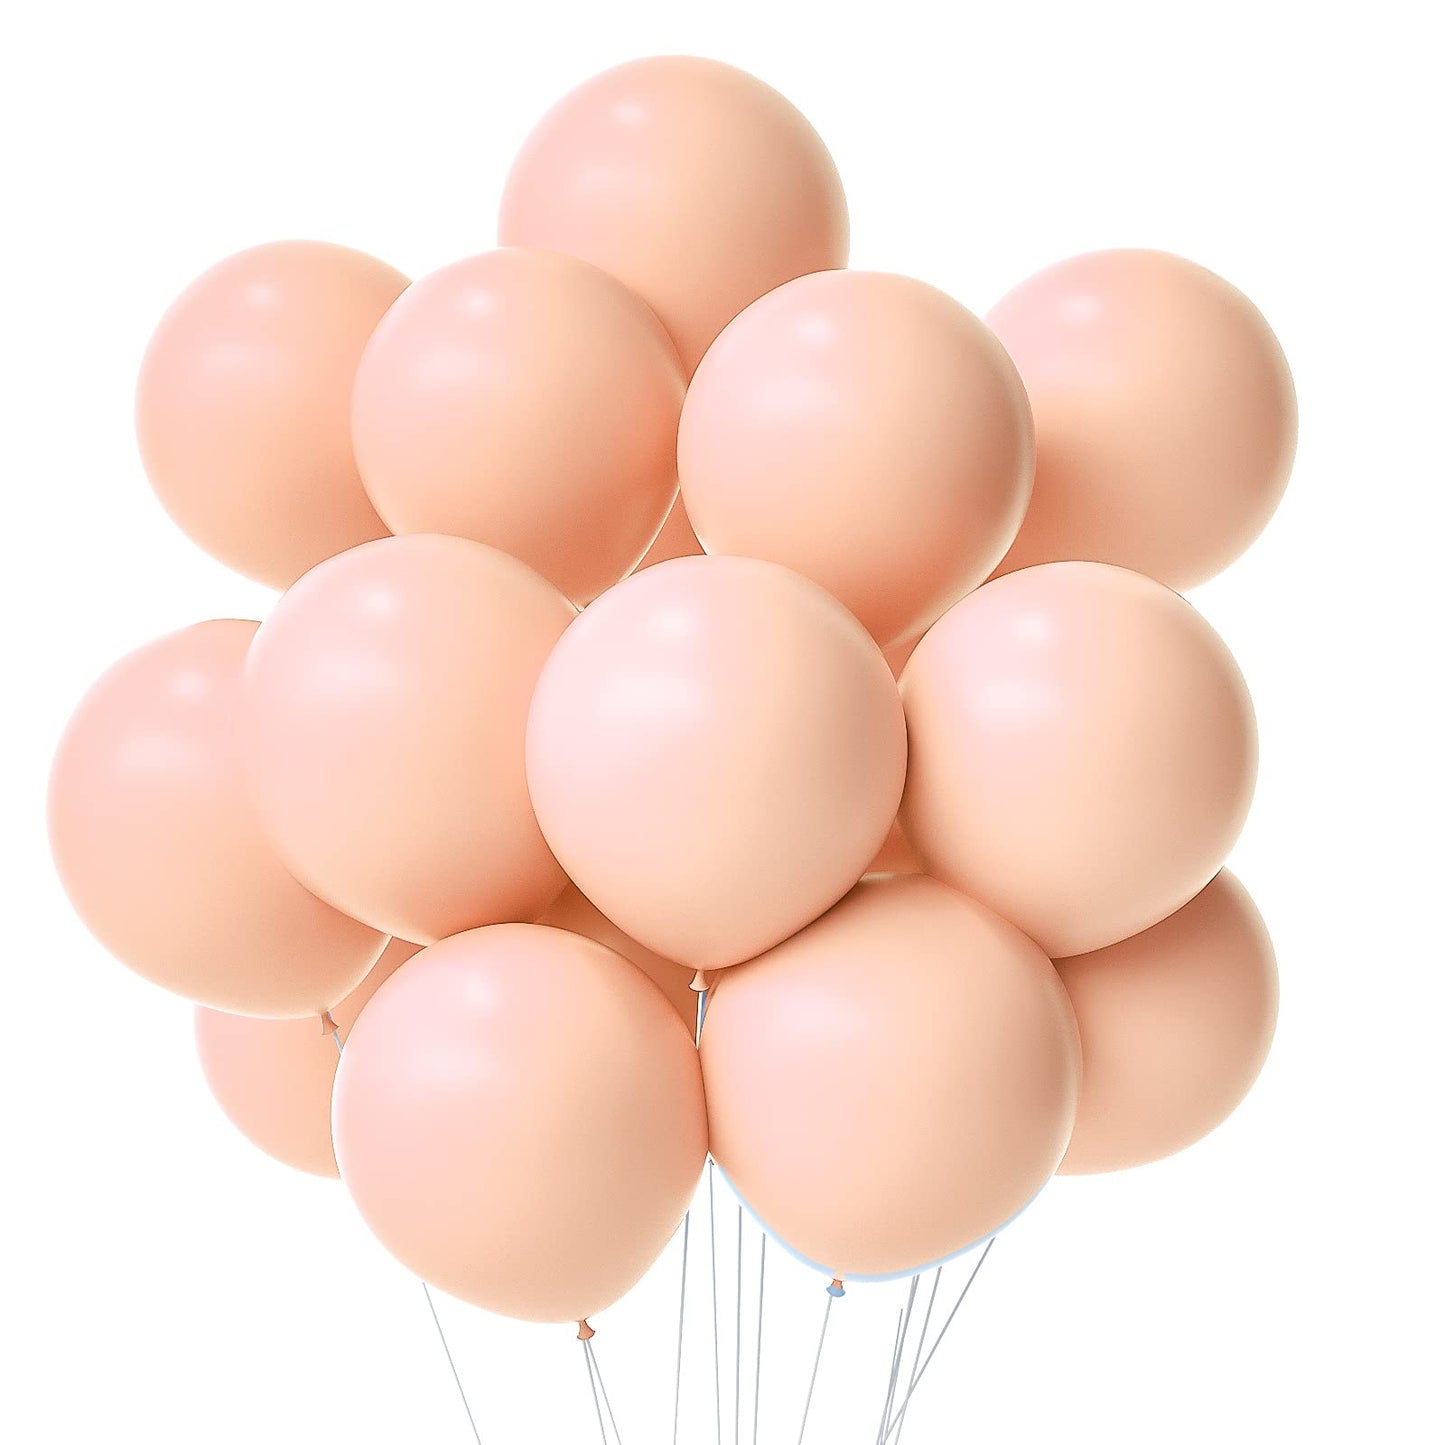 Blush Pastel Balloon Pack of 25 for birthday decoration, Anniversary Weddings Engagement, Baby Shower, New Year decoration, Theme Party balloons